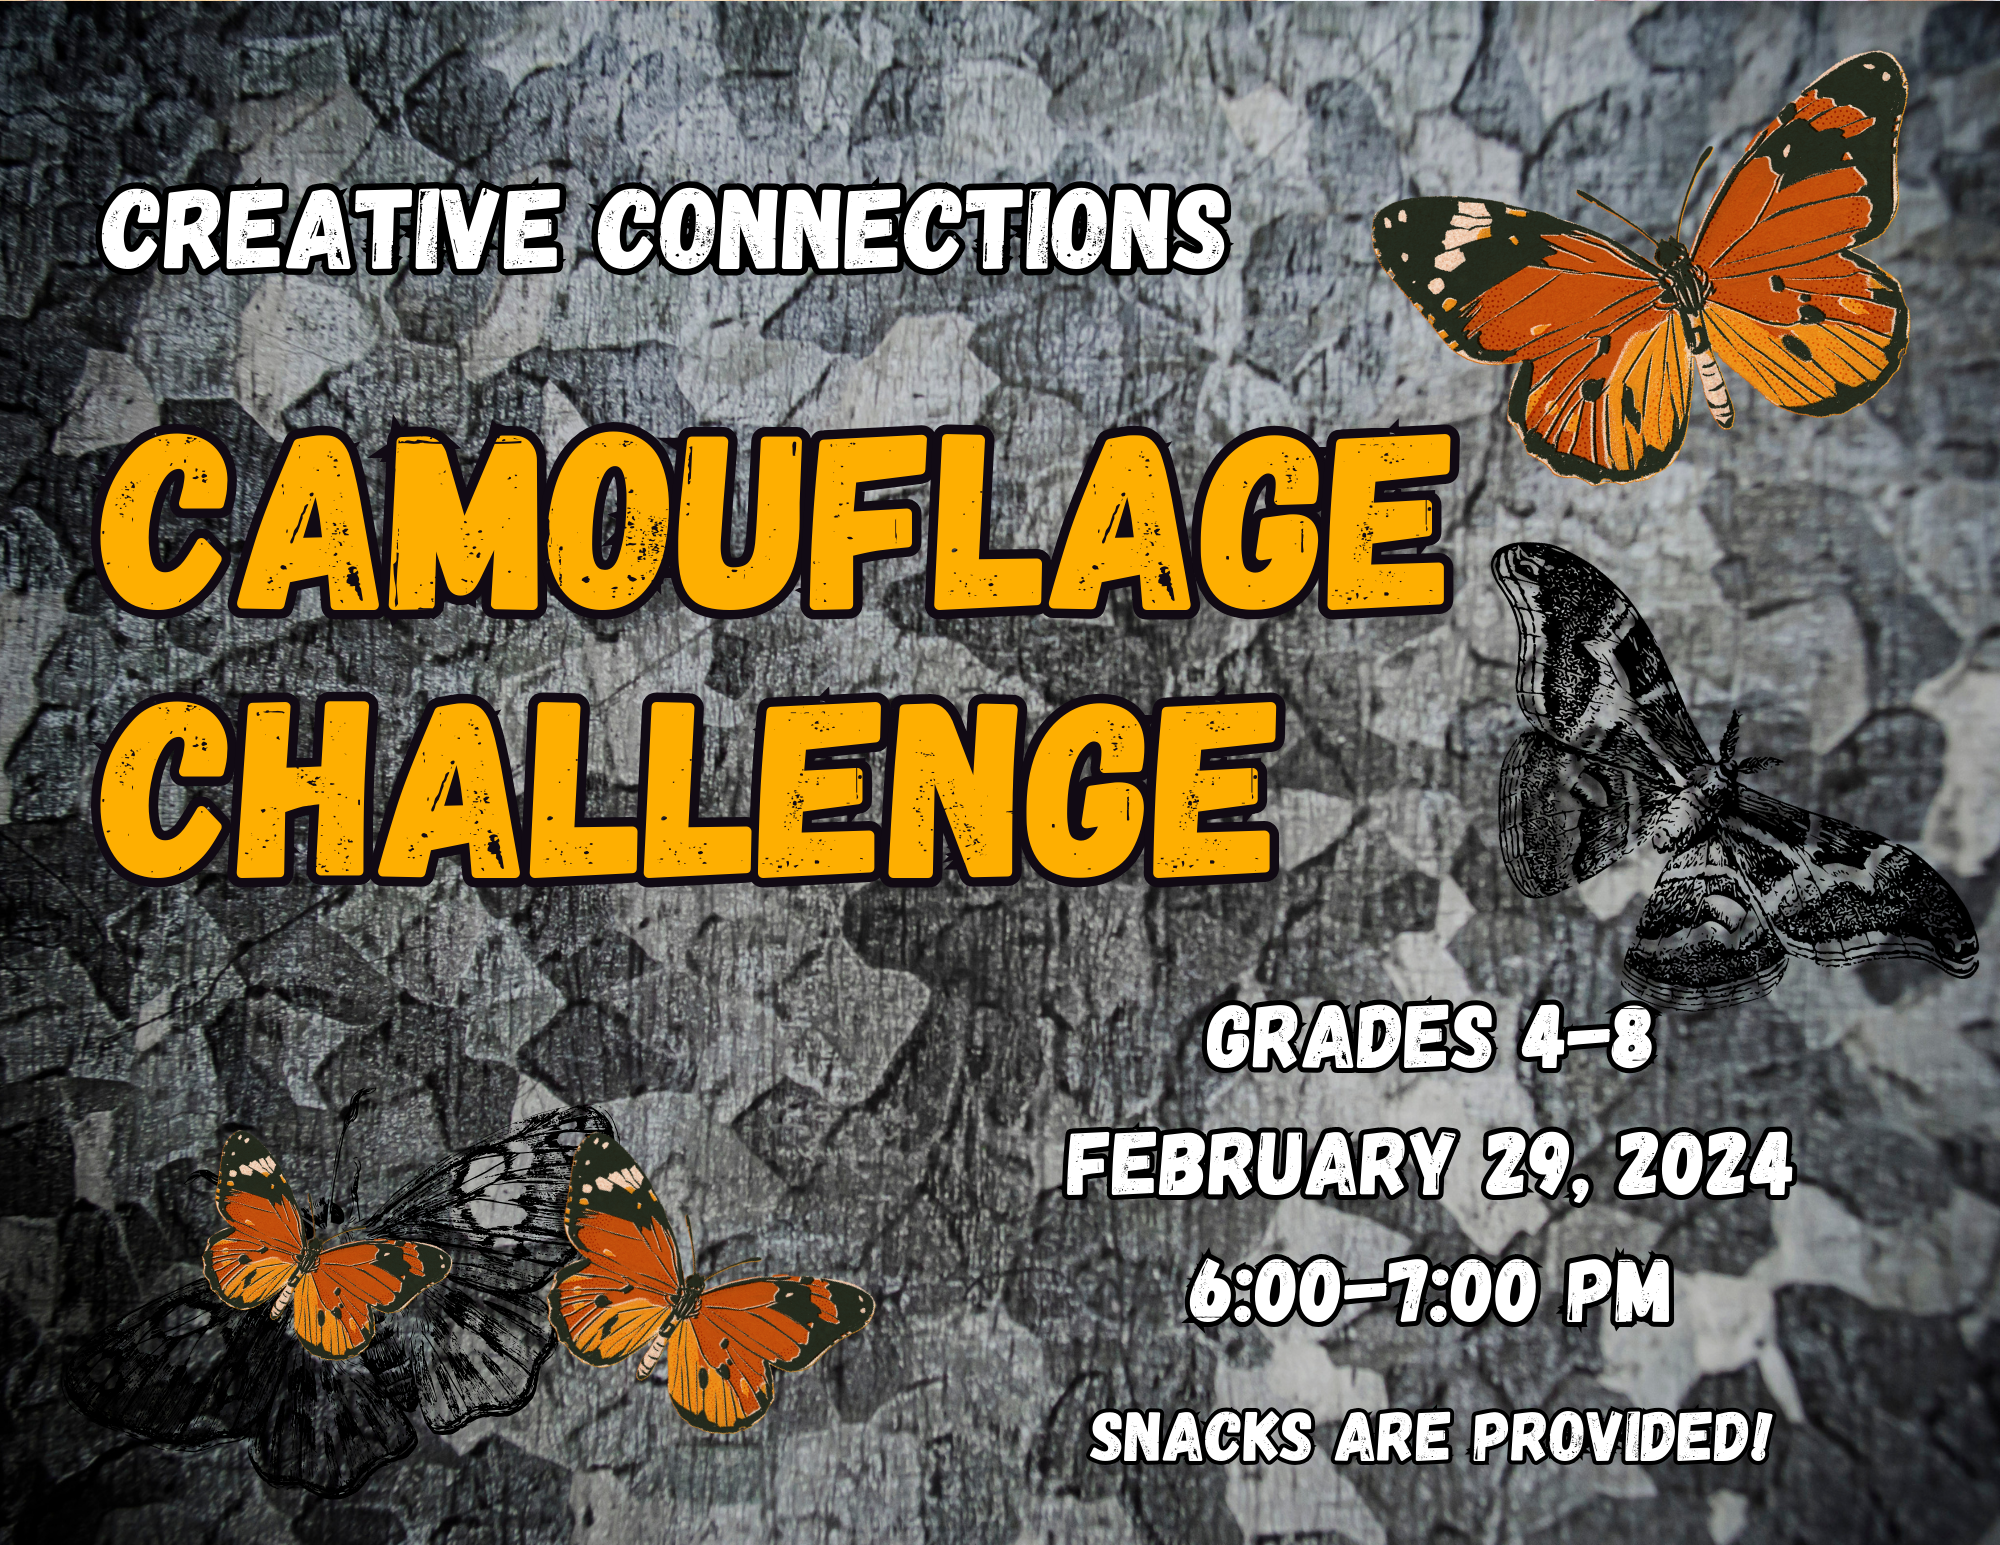 Creative Connections Camouflage Challenge grades 4 to 8 February 29 2024 6 to 7 pm snacks are provided!